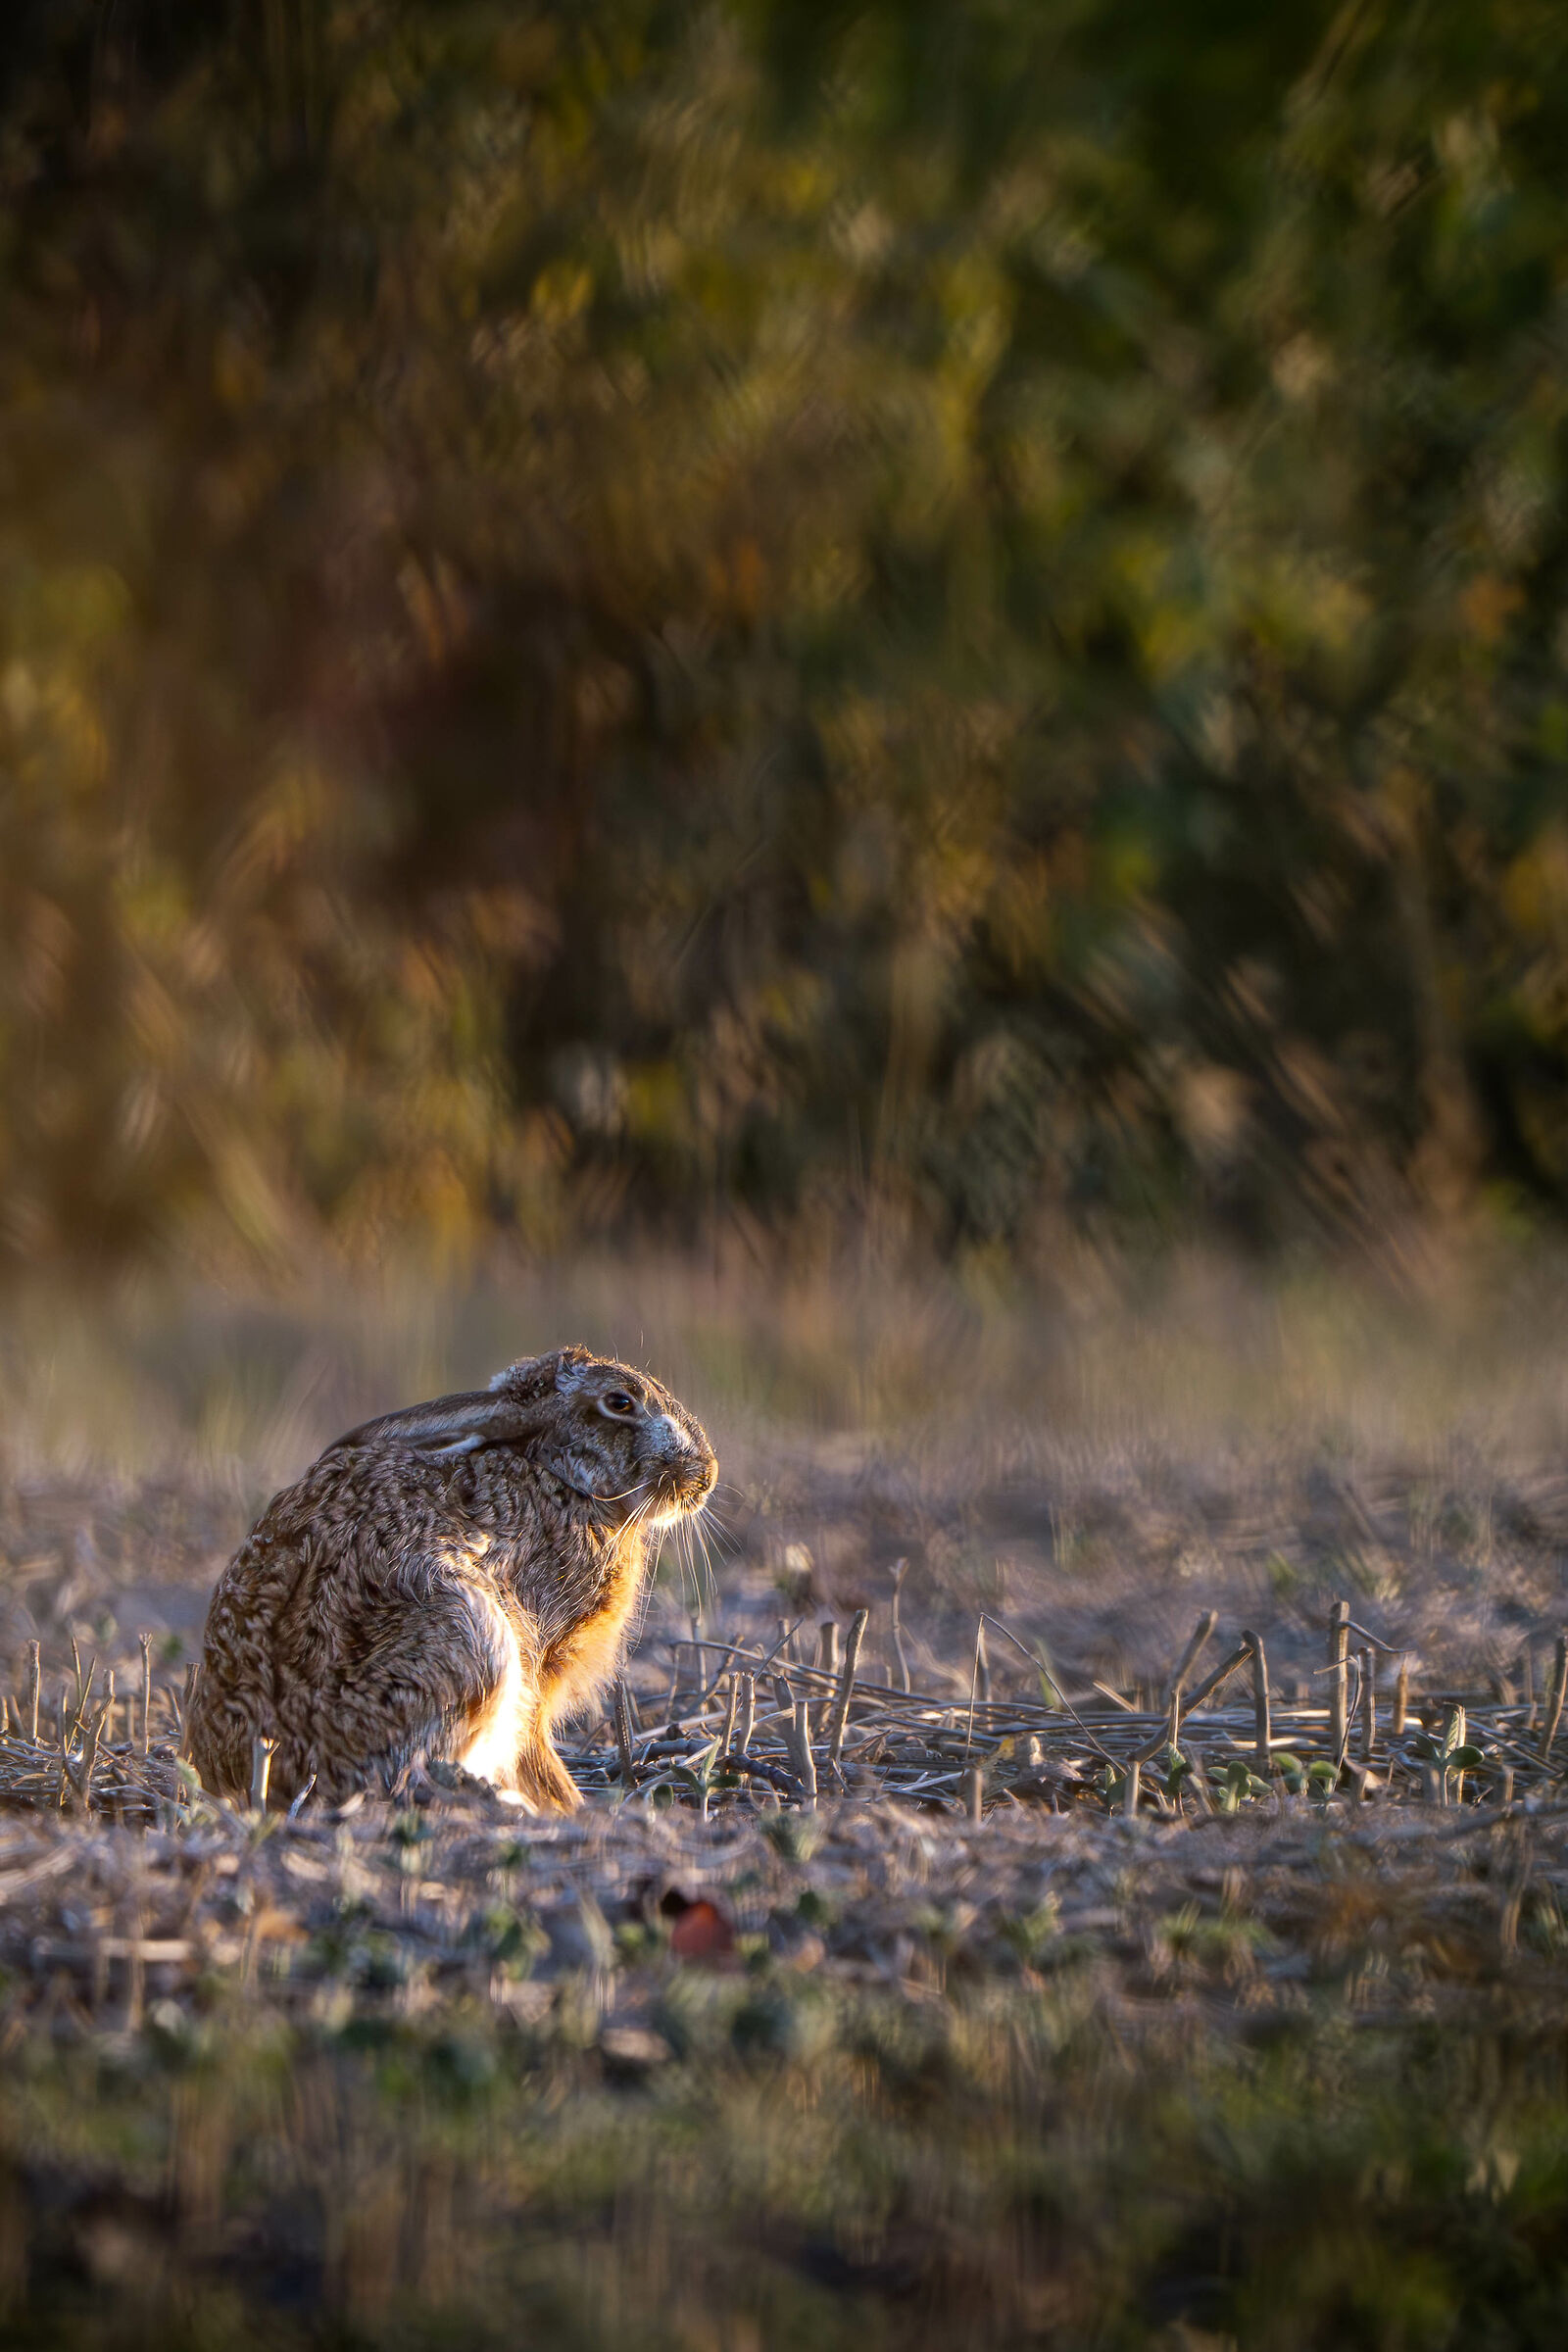 Hare warming up in the sun of a November sunset...